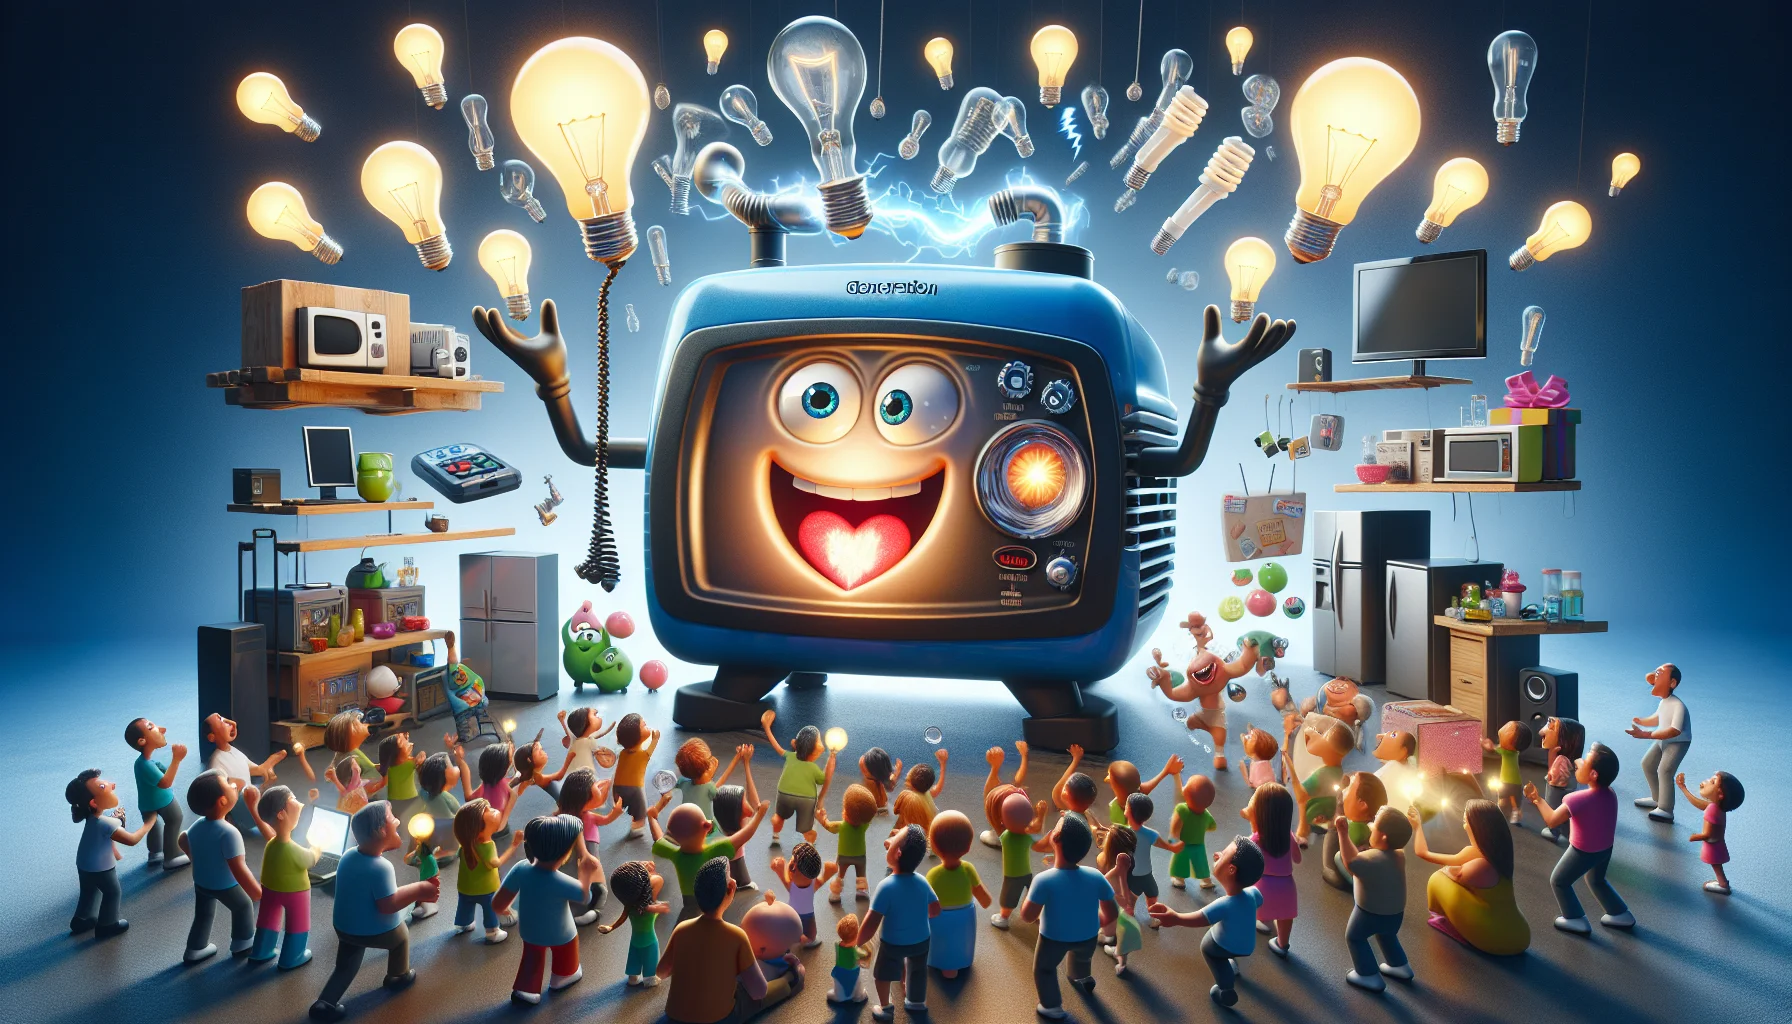 Imagine an amusing scene involving a home generator, seemingly alive with personality, in a compelling setting that sparks interest in generating electricity. This cheerful generator, with cartoonish eyes and a glowing, power 'heart', is seen actively producing electricity for various daily appliances like a television, a computer and a refrigerator that are conscientiously spread around. With a humorous twist, it's juggling lightbulbs like an experienced circus performer, while producing small zaps and sparks to entertain an enthusiastic audience, composed of a diverse group of adults and children from different descents including Asian, African, Caucasian and Hispanic. This highly evocative scene creates an inviting and appealing aura around the concept of electricity generation.